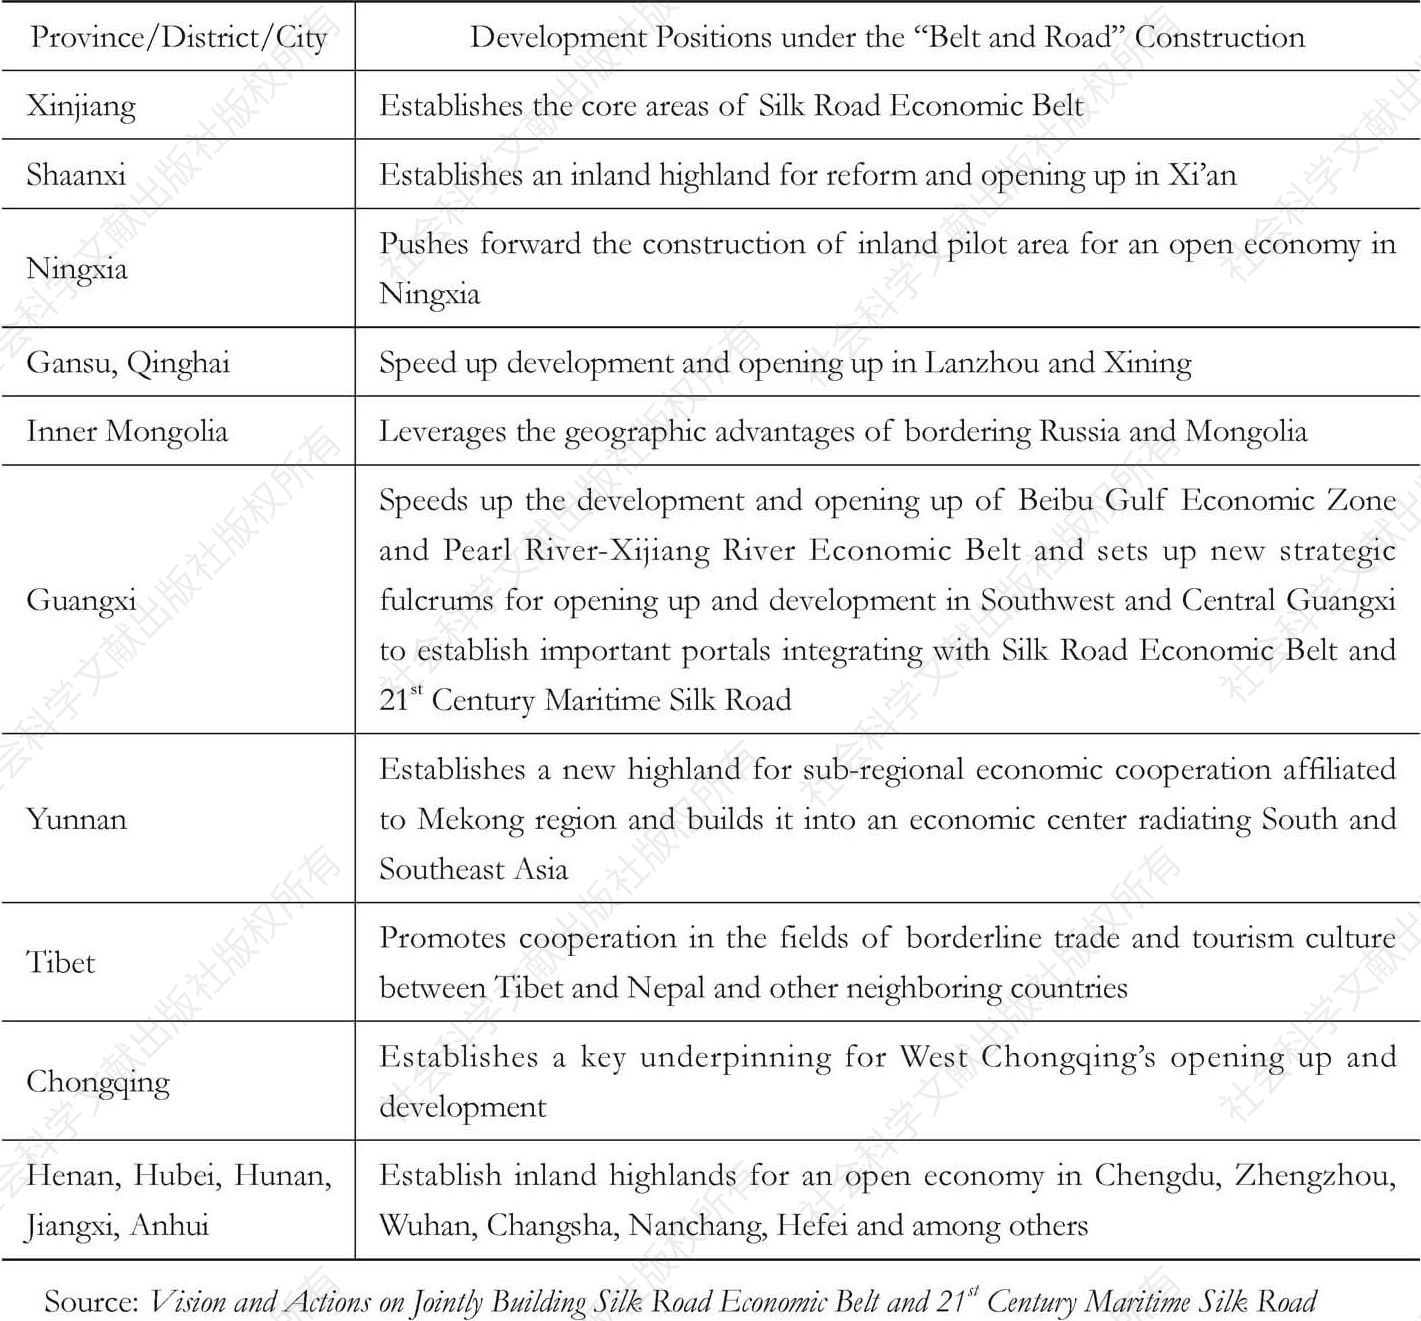 Table 1 Central and West China’s Development Positions under the “Belt and Road” Construction